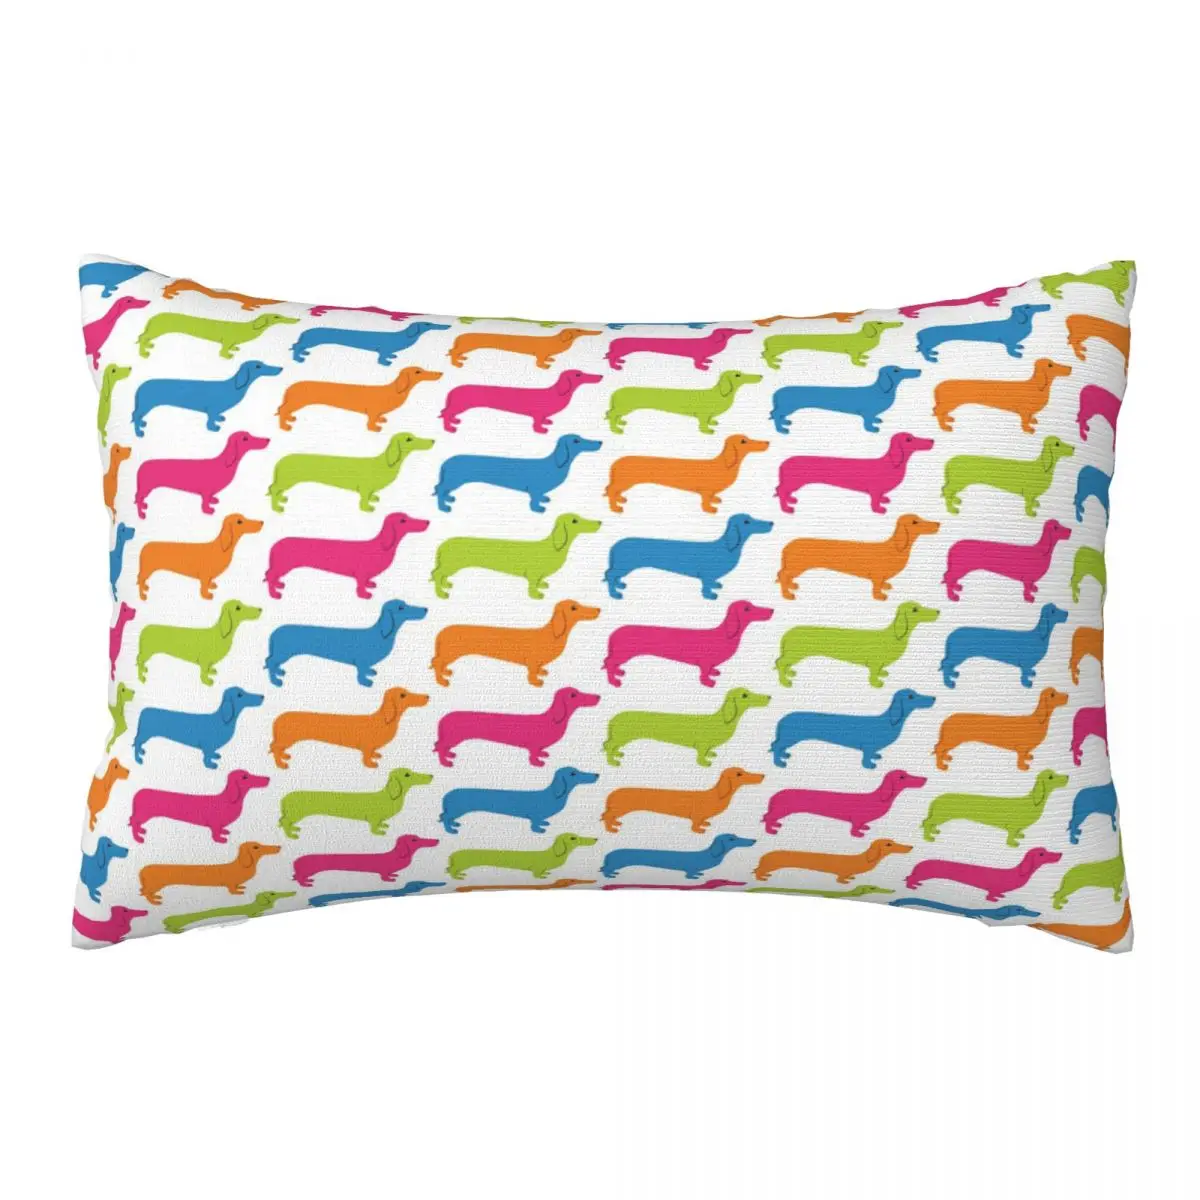 

Dachshund Of Various Colors Decorative Pillow Covers Throw Pillow Cover Home Pillows Shells Cushion Cover Zippered Pillowcase